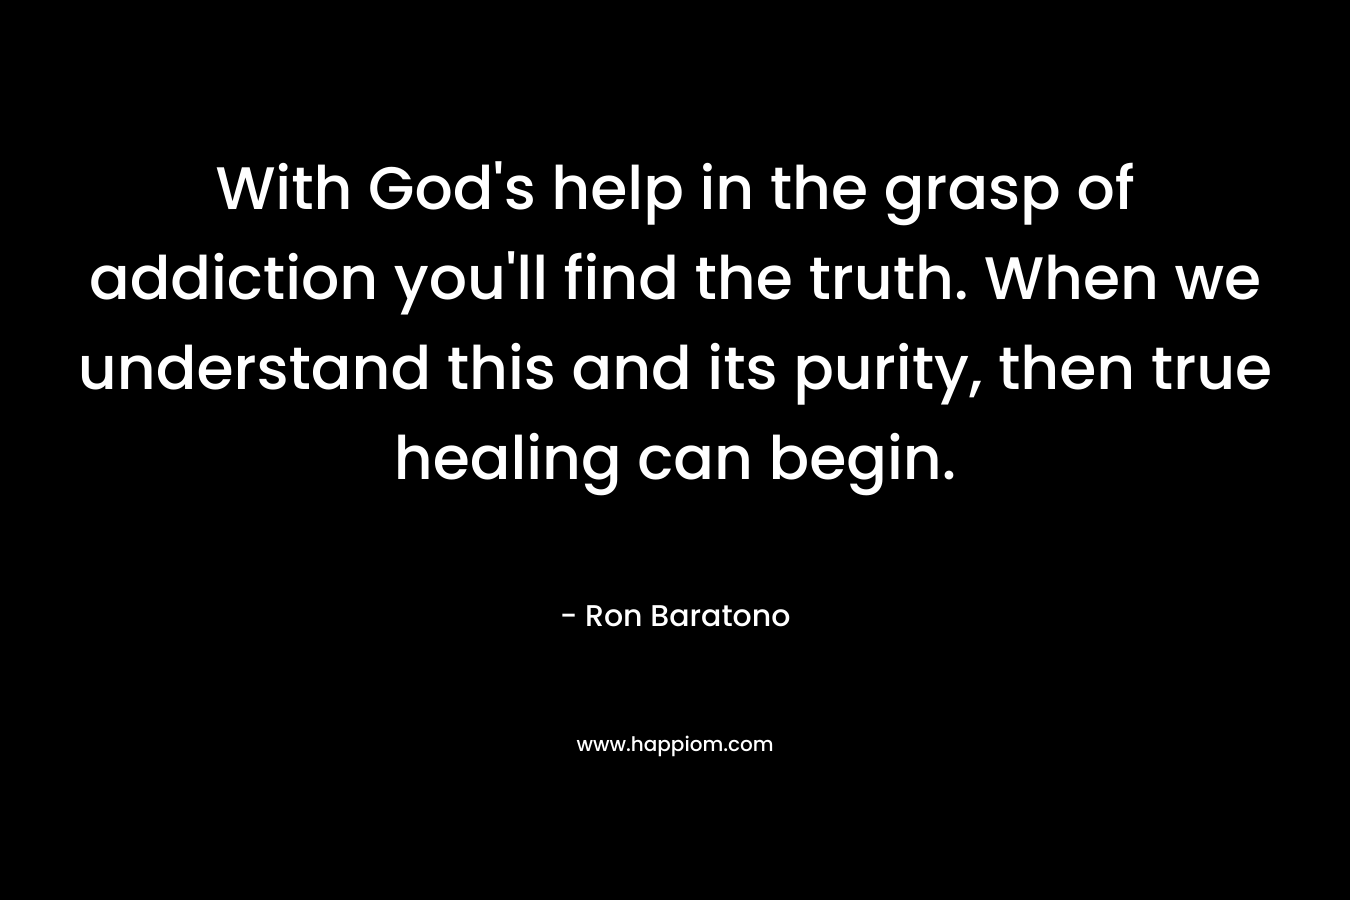 With God's help in the grasp of addiction you'll find the truth. When we understand this and its purity, then true healing can begin.